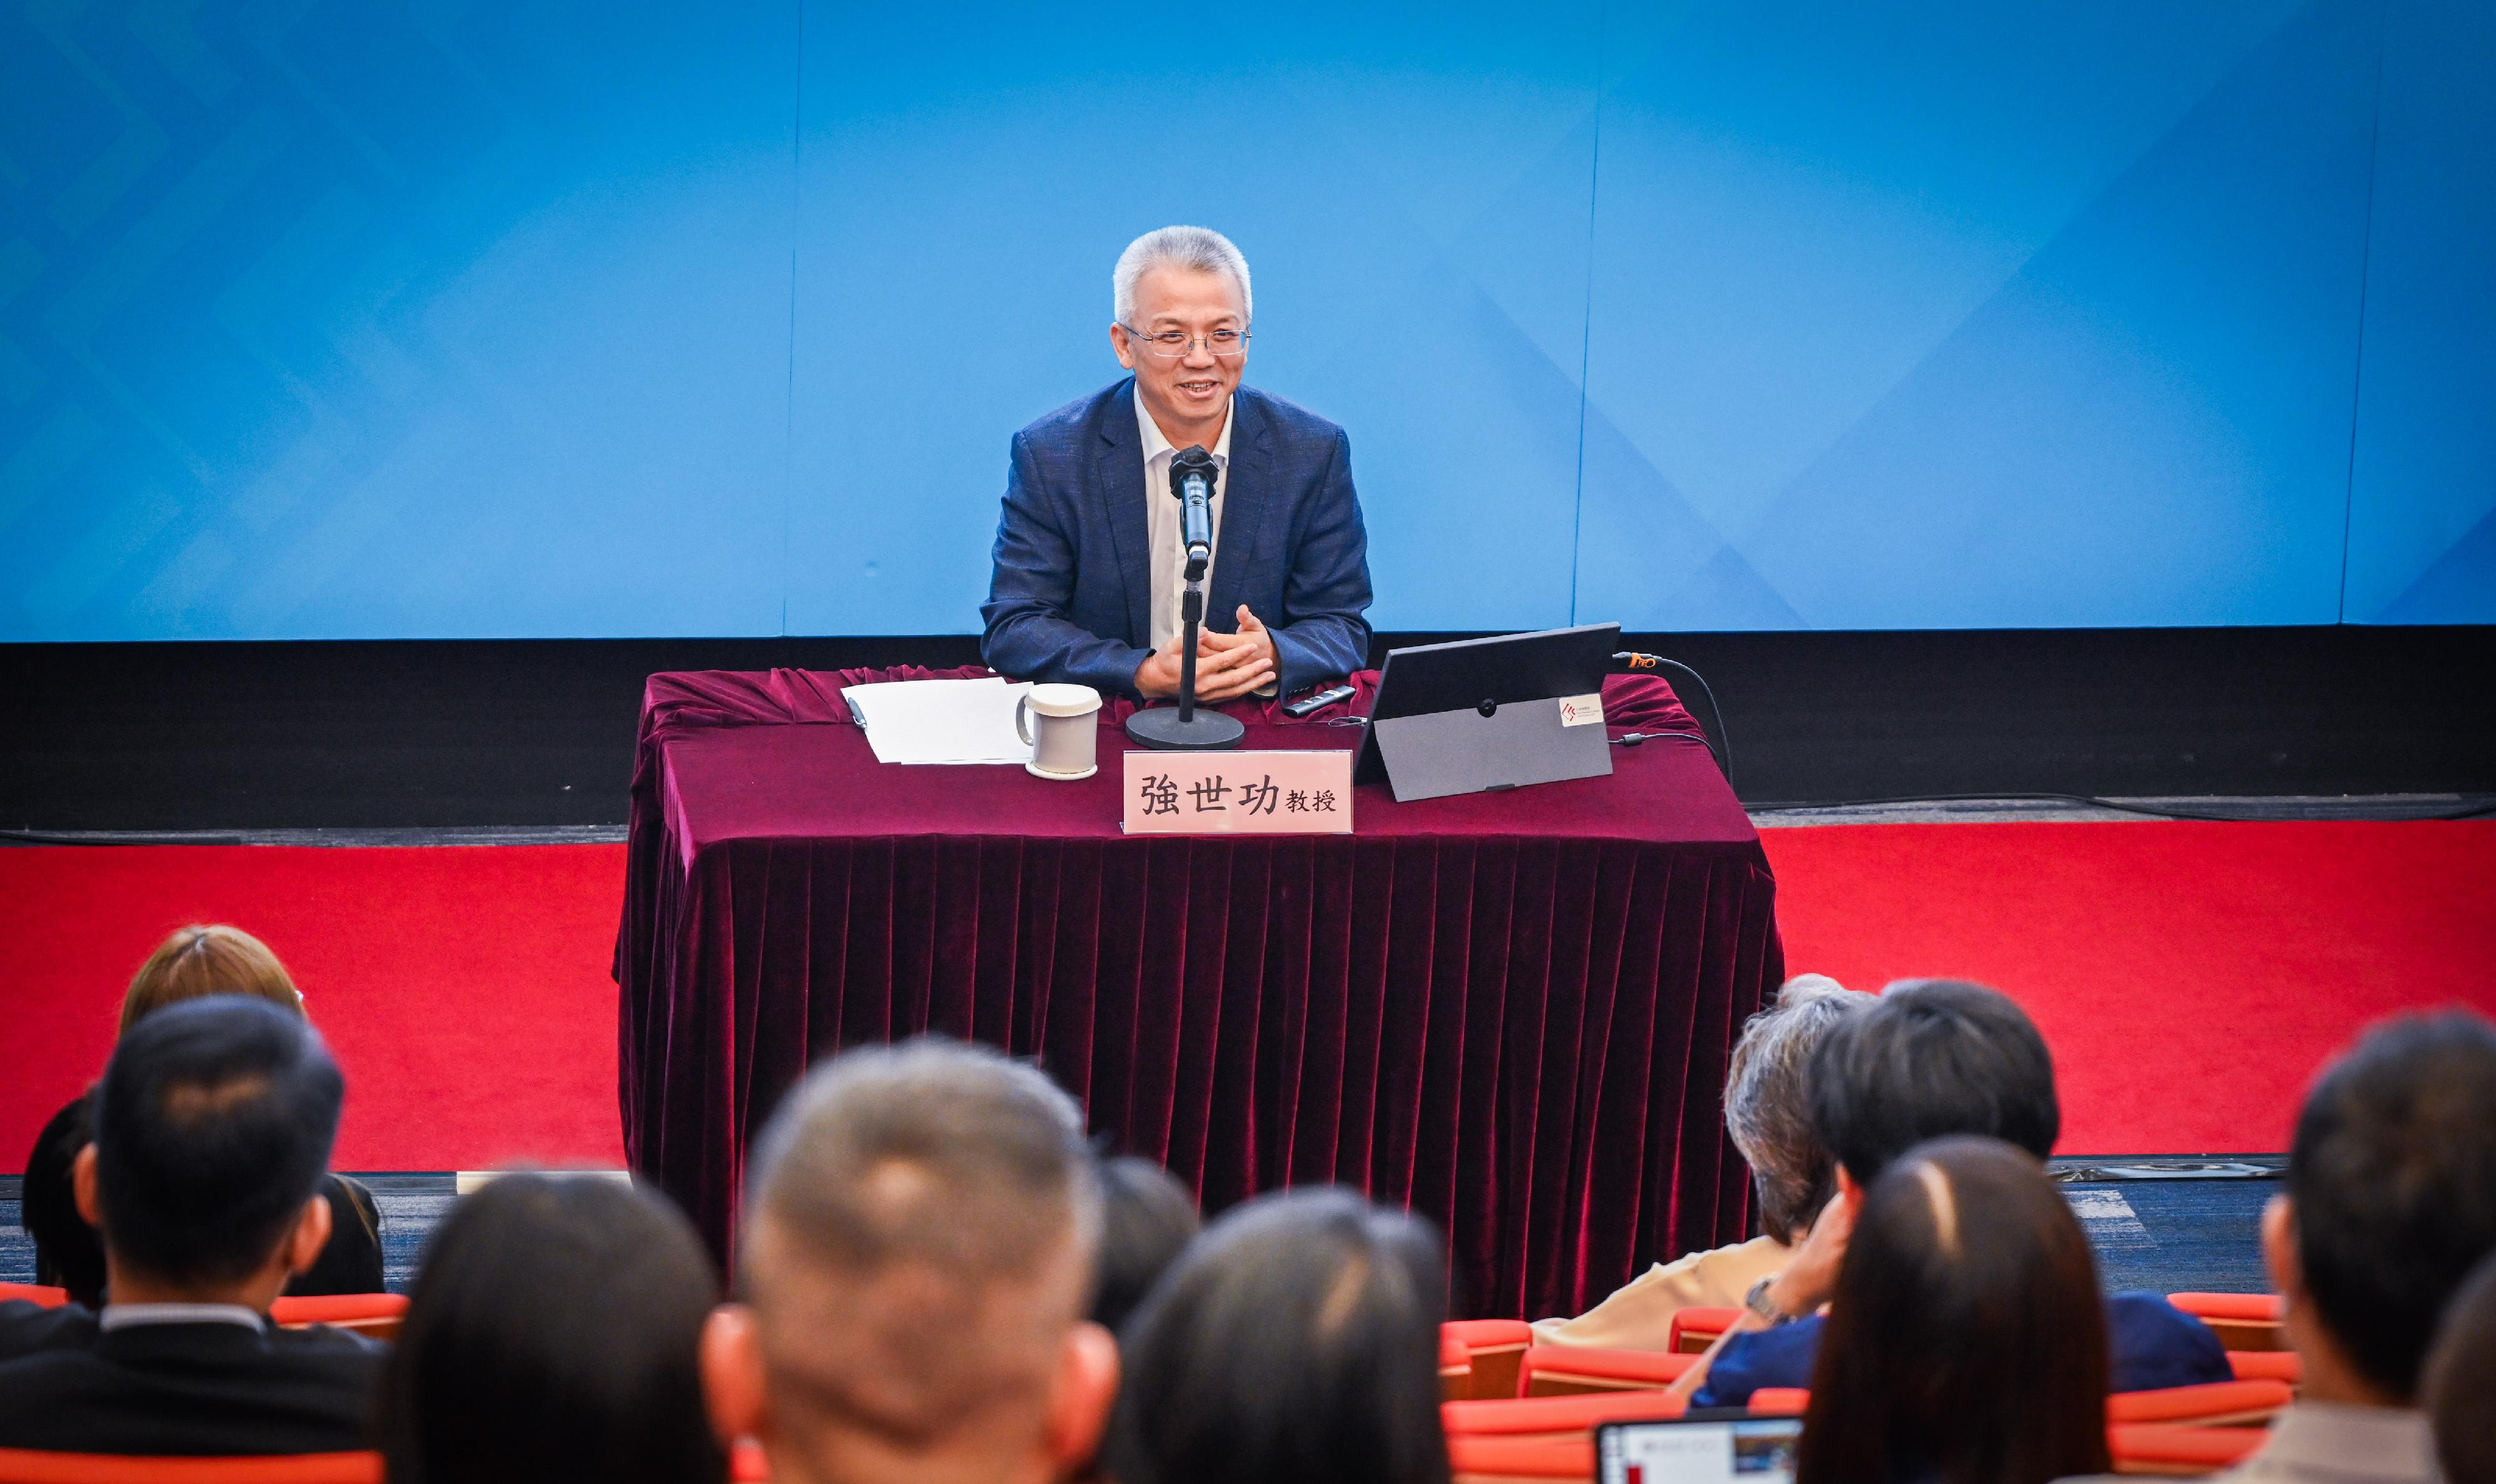 The Civil Service College of the Civil Service Bureau, in collaboration with the Institute for Hong Kong and Macau Studies, Peking University, launched an in-depth programme on "one country, two systems" and the contemporary China, and organised a lecture on the topic of "The Theory and Practice of 'One Country, Two Systems'". Photo shows Professor Jiang Shigong of the Peking University Law School delivering the talk.